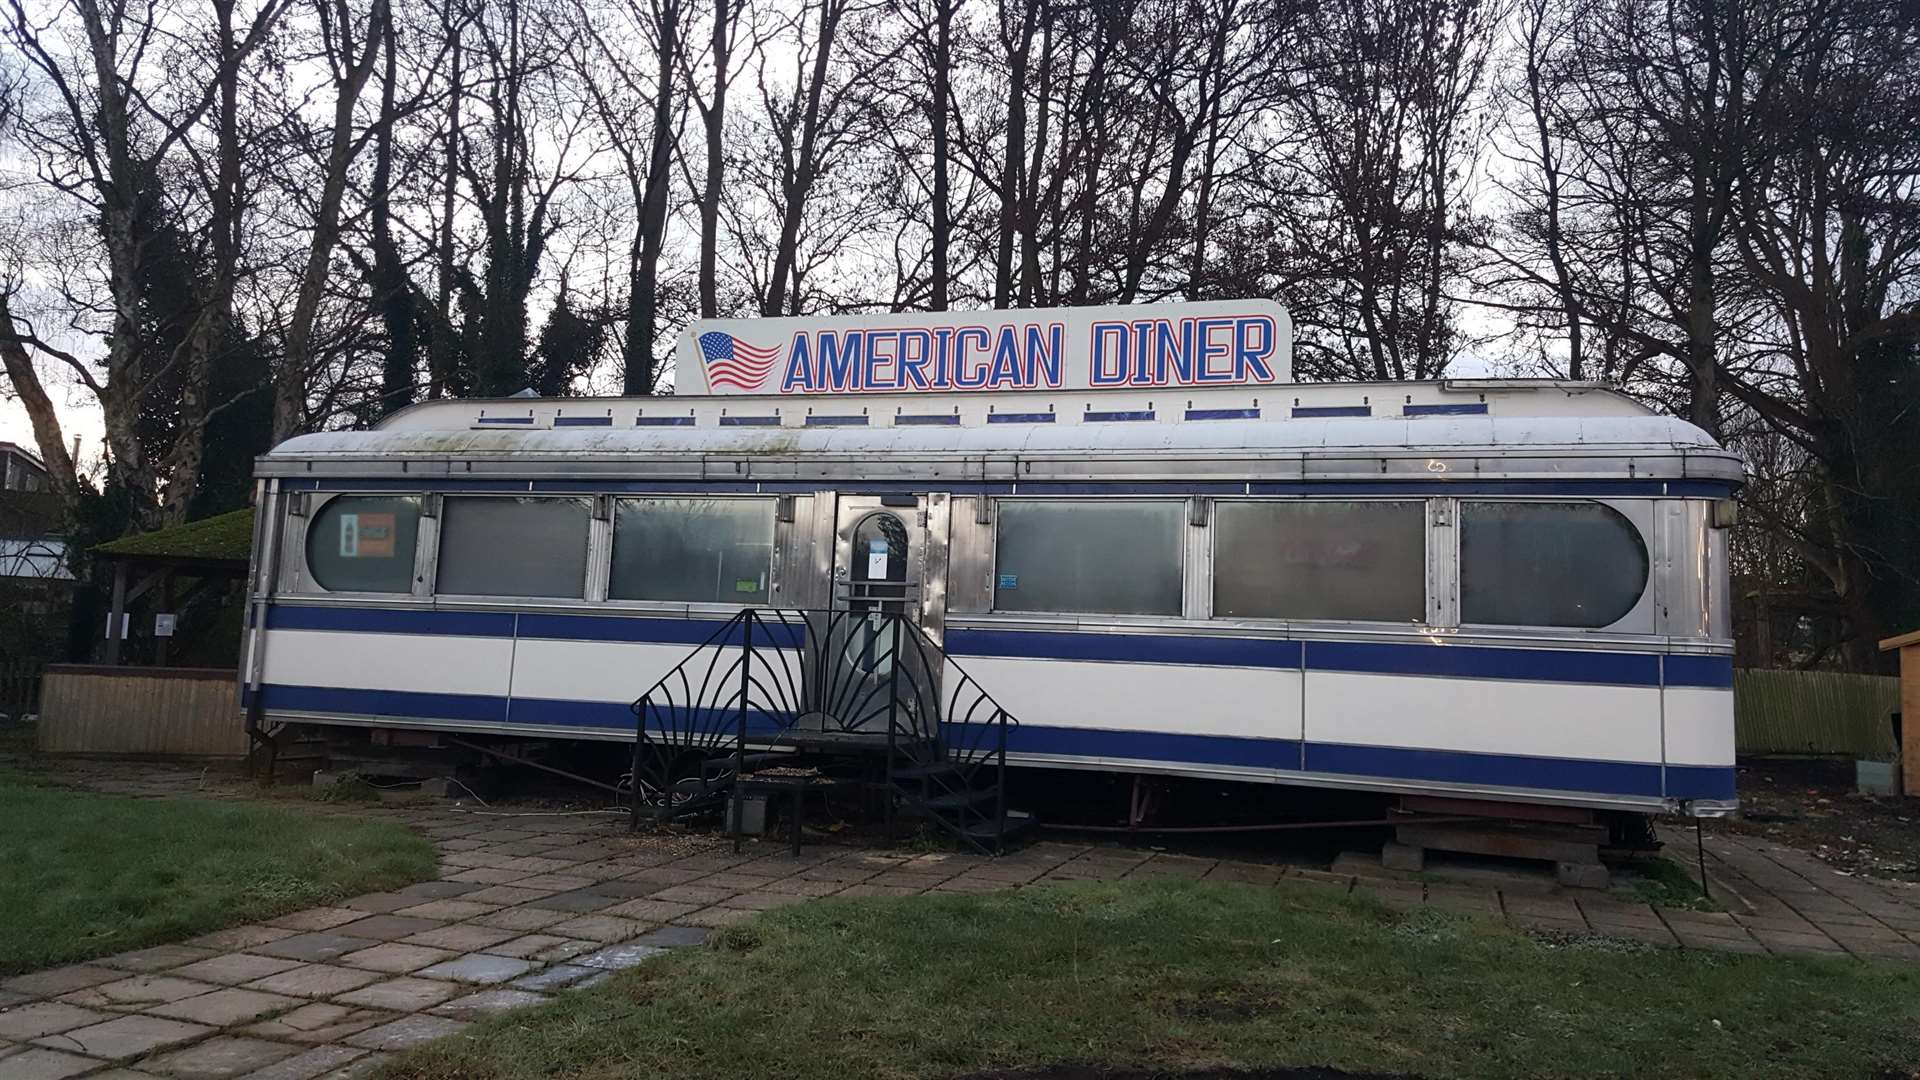 The former American Diner in Kennington pictured this week